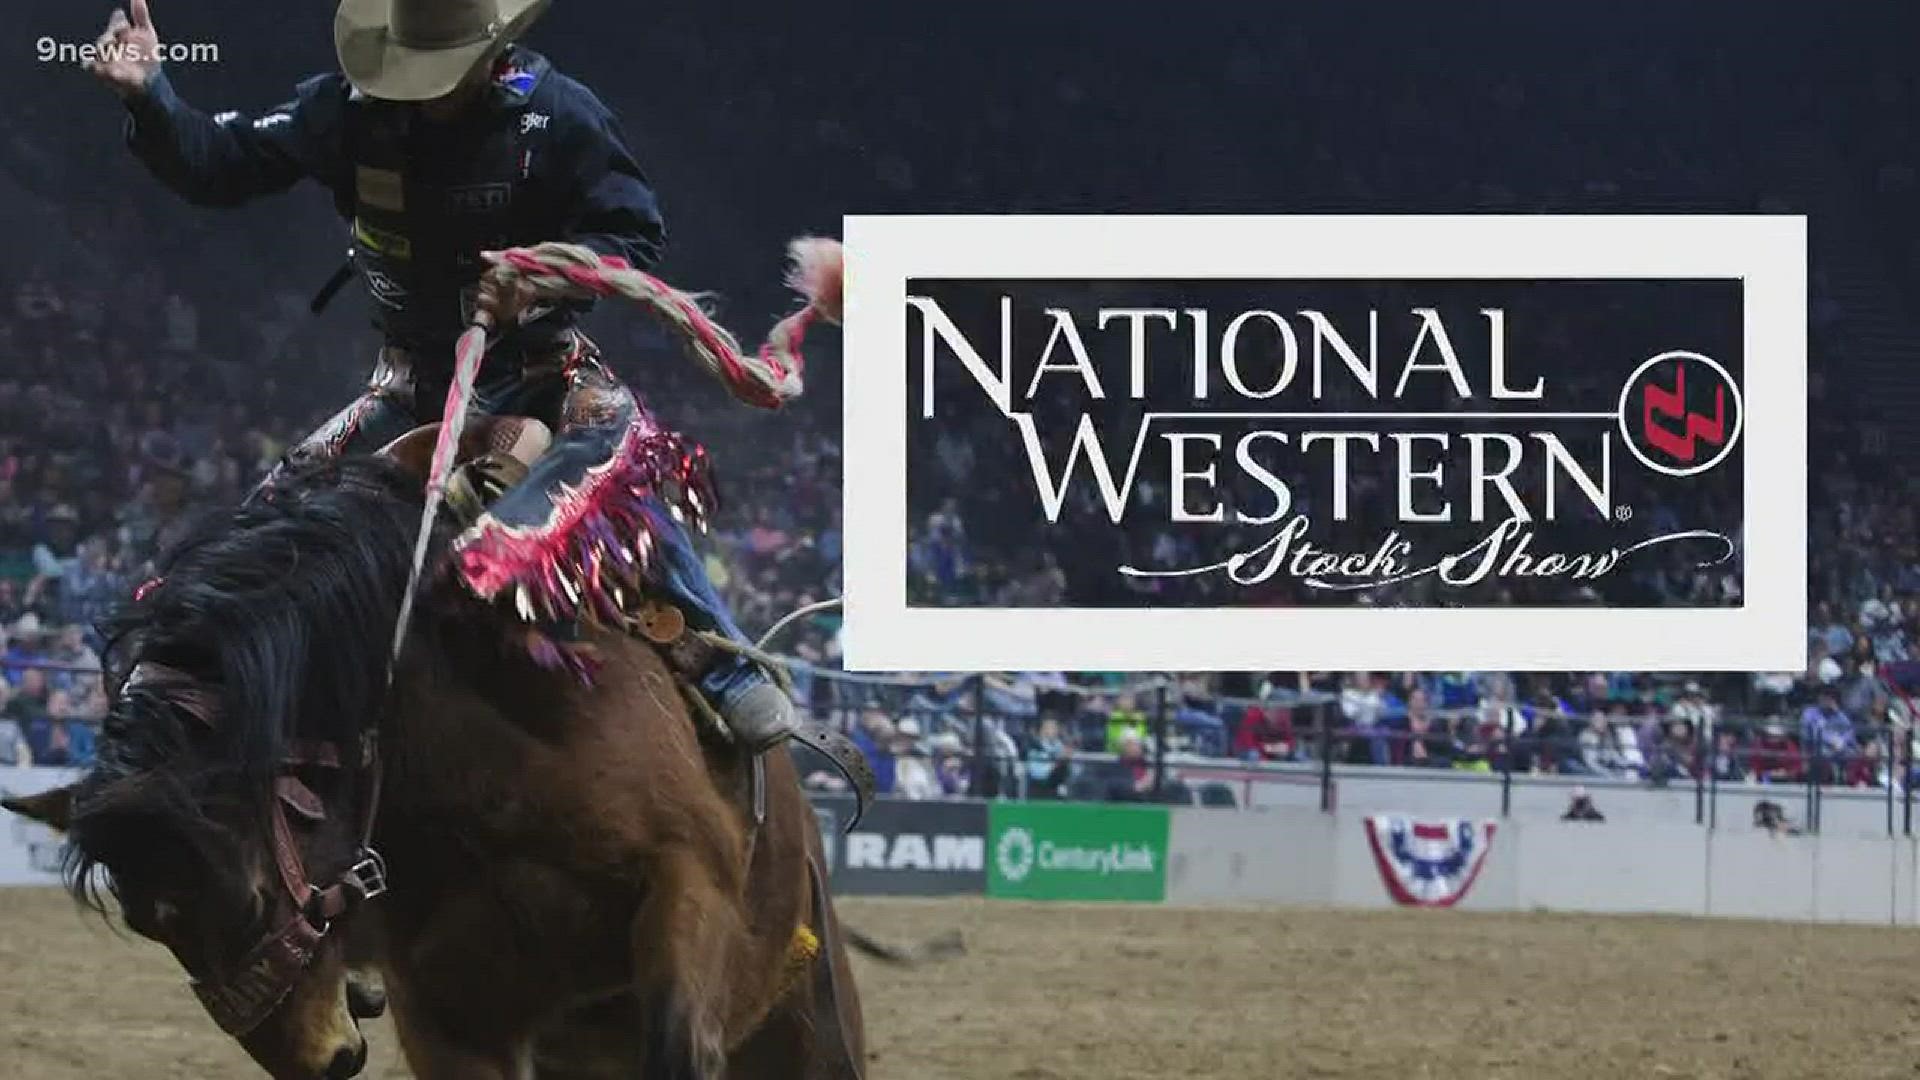 9NEWS' Liz Kotalik speaks with the Manager of Horse Shows of the National Western Stock Show. From ranch rodeos and reining to draft shows and roping, the National Western's horse shows are some of the most prestigious in the country. The 2019 NWSS ends Sunday, January 25.